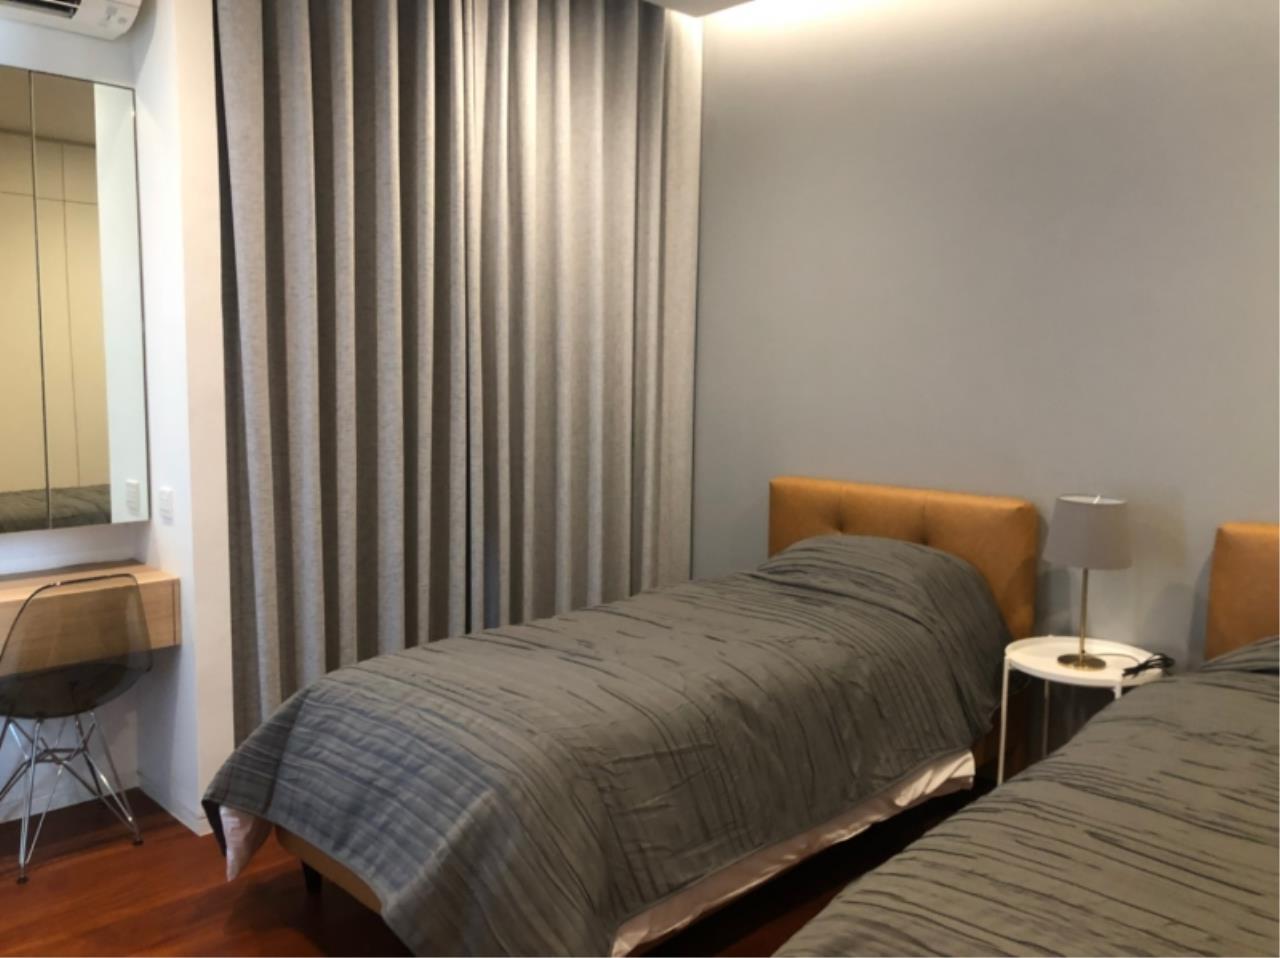 Century21 Skylux Agency's 33 Serviced Apartment / Apartment (Serviced) For Rent / 2 Bedroom / 110 SQM / BTS Asok / Bangkok 3